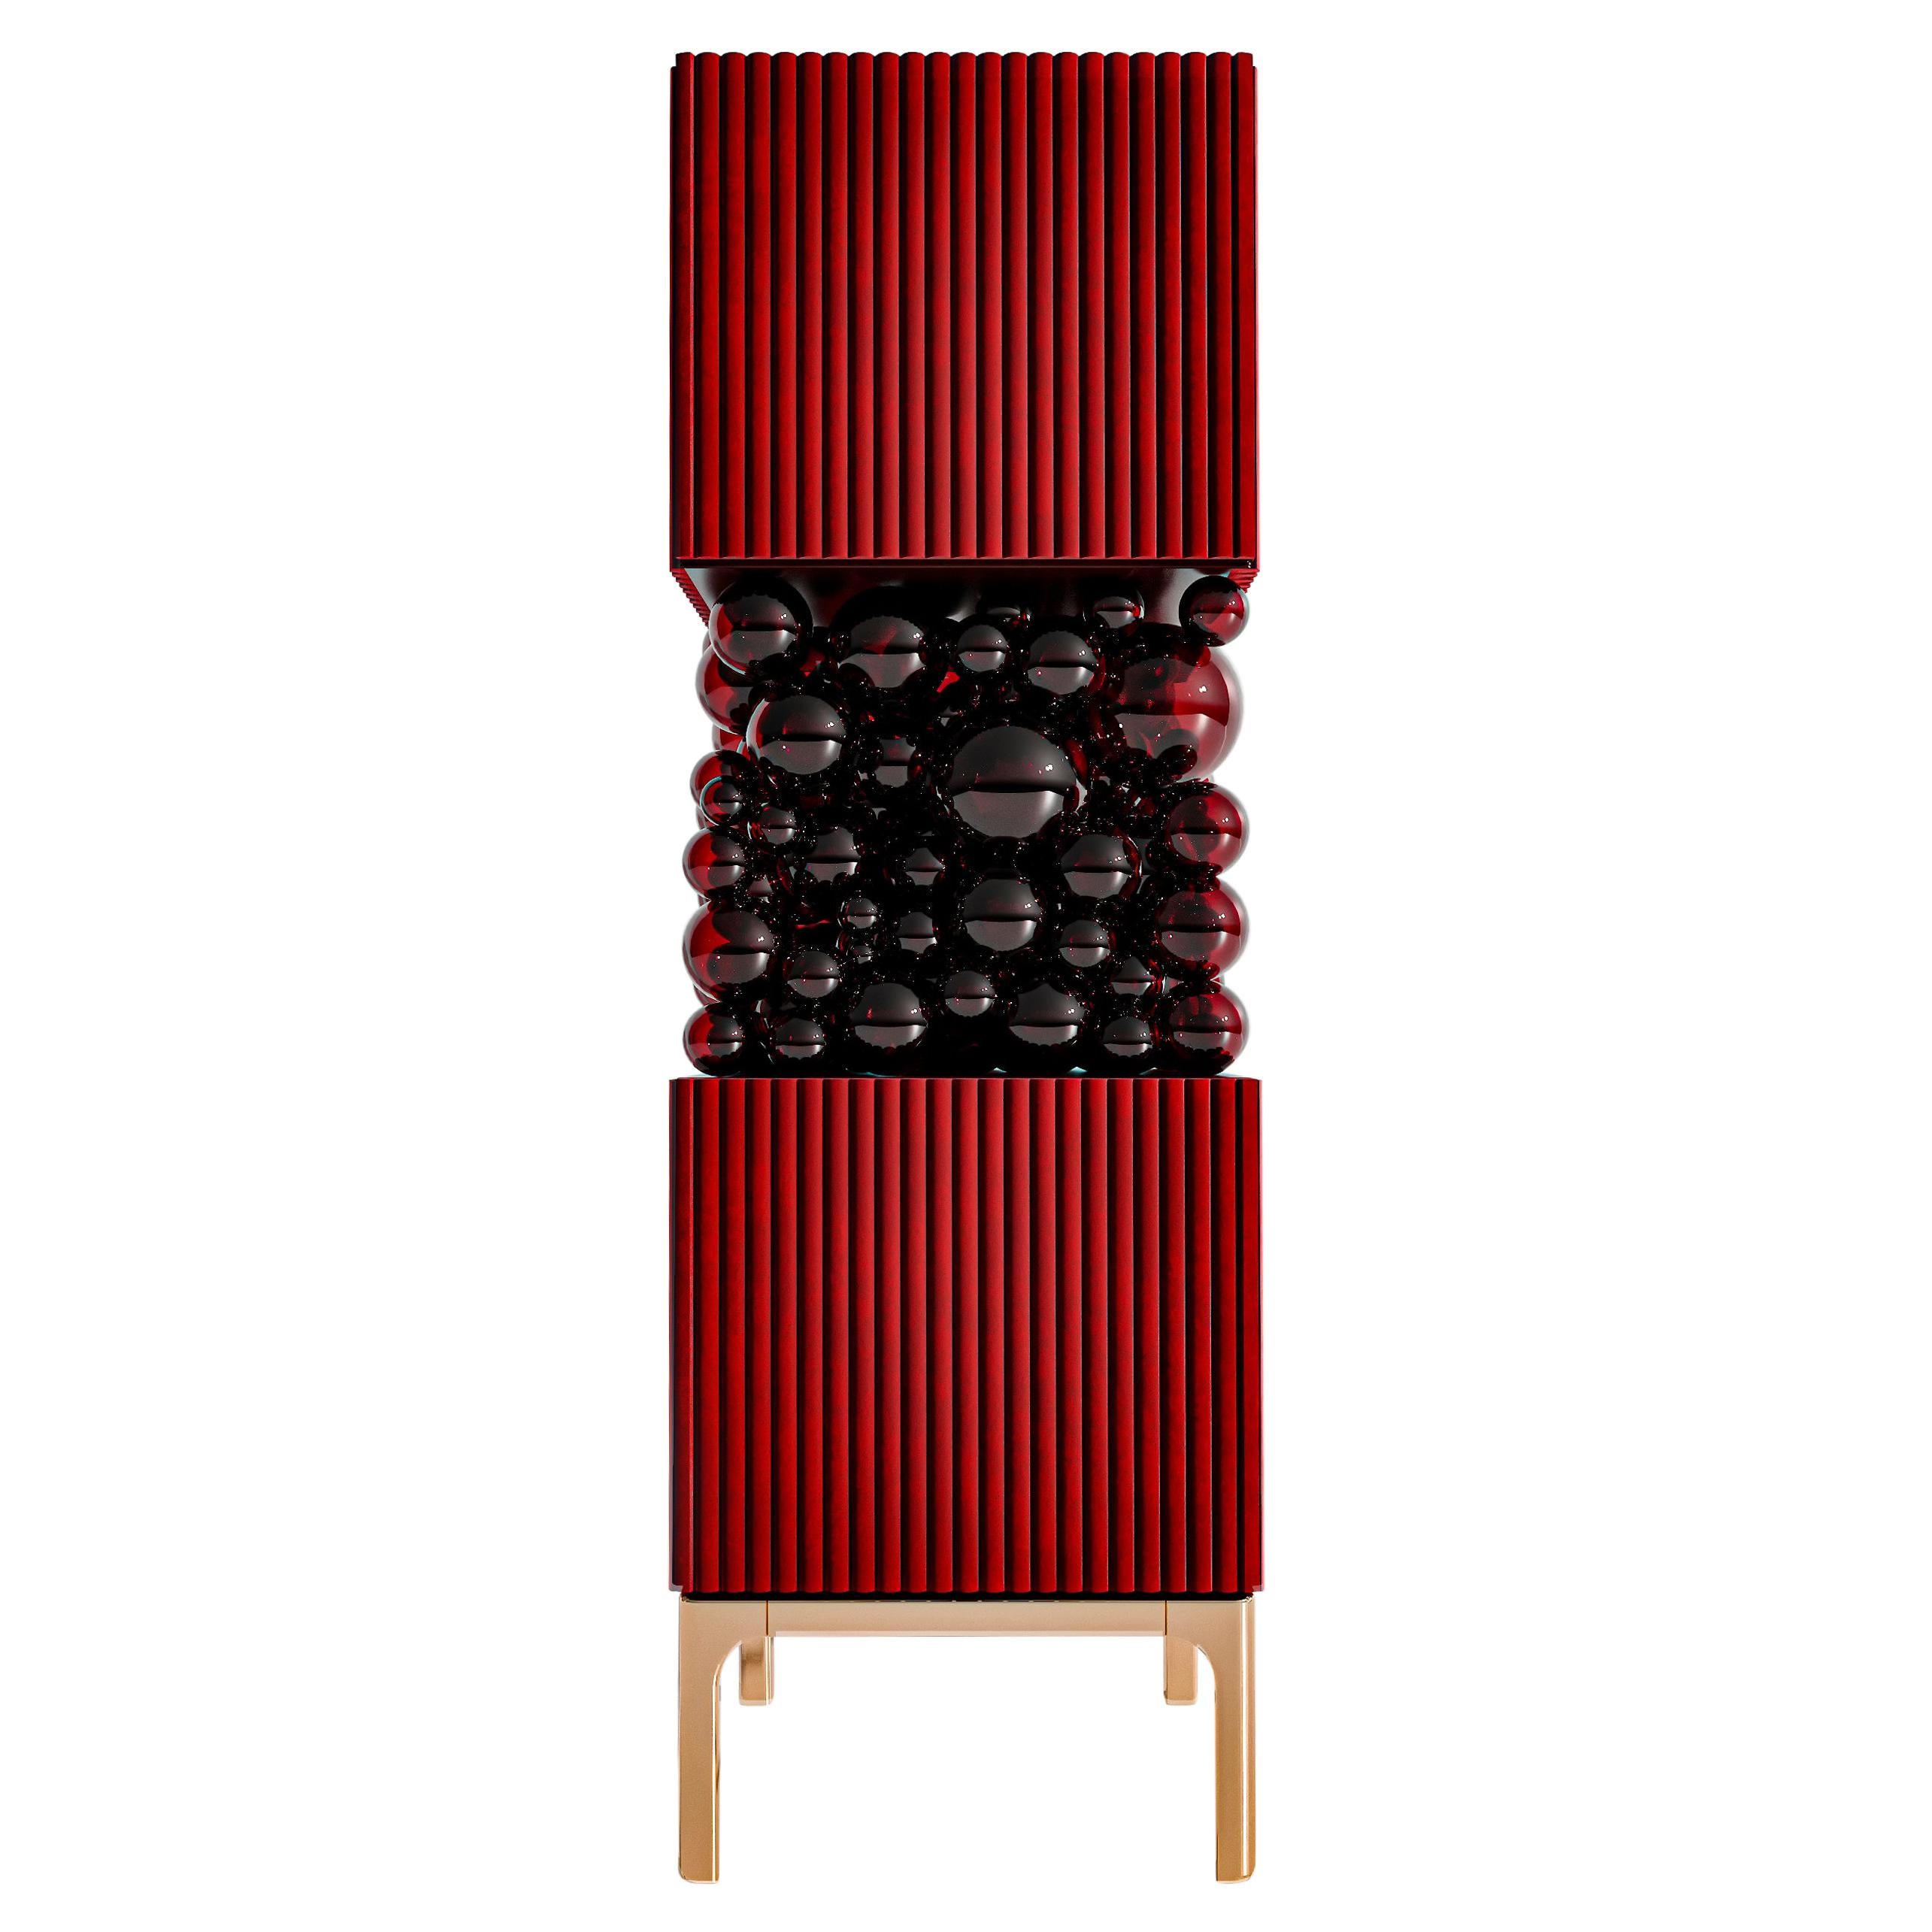 Dark-Red Cabinet, Bubbles Collection, Amazing Emotional Design for Your Interior